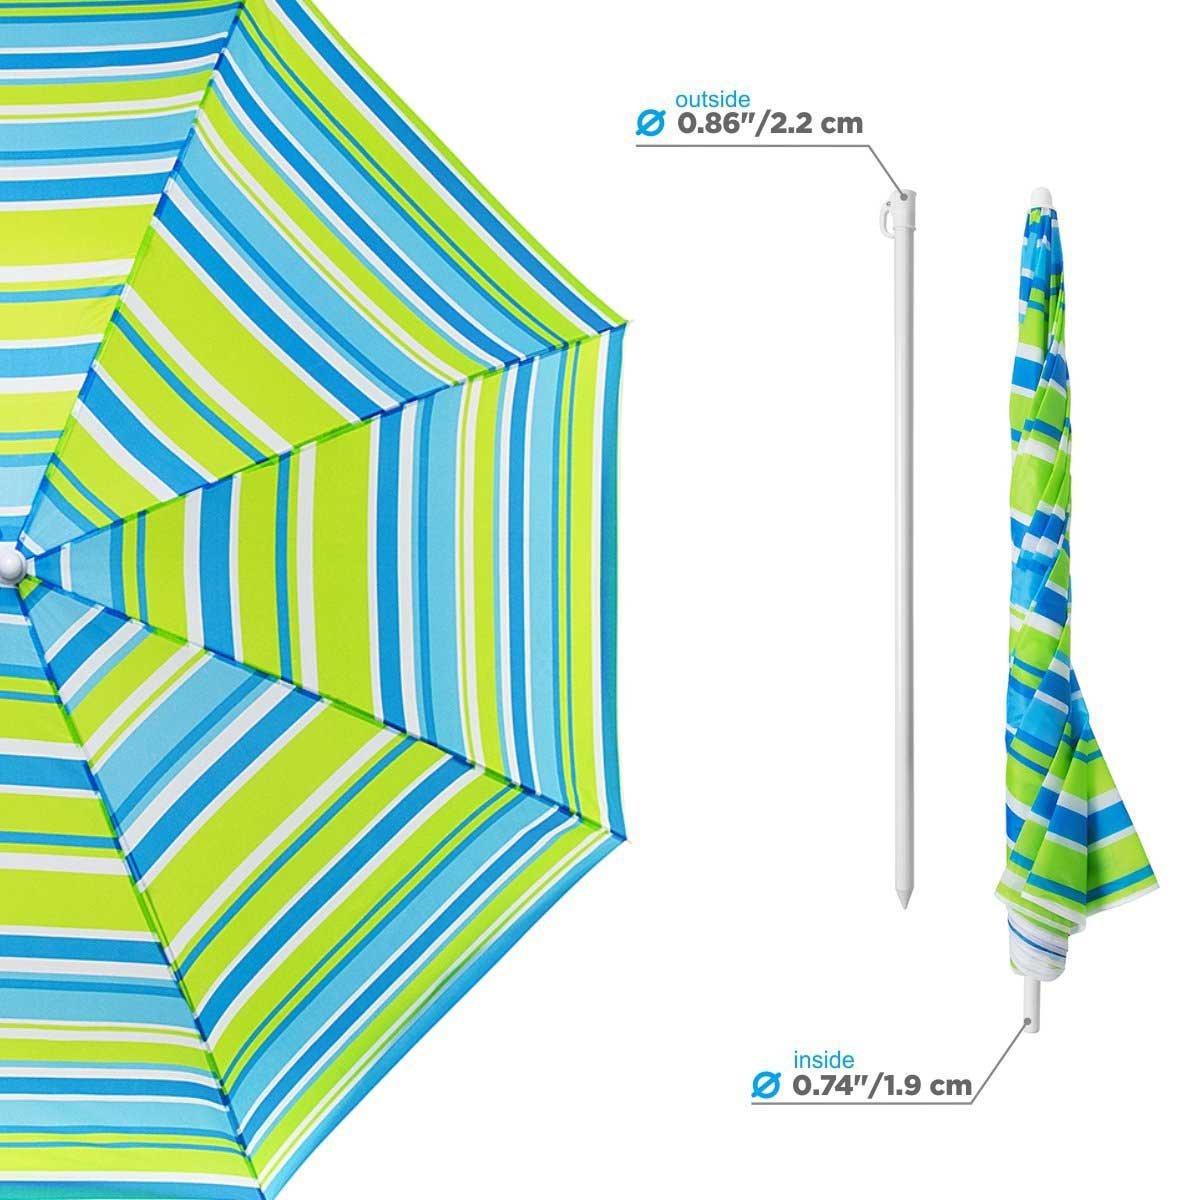 Sea-Green Tilting Beach Umbrella is made of waterproof polyester 170T featuring UV protection